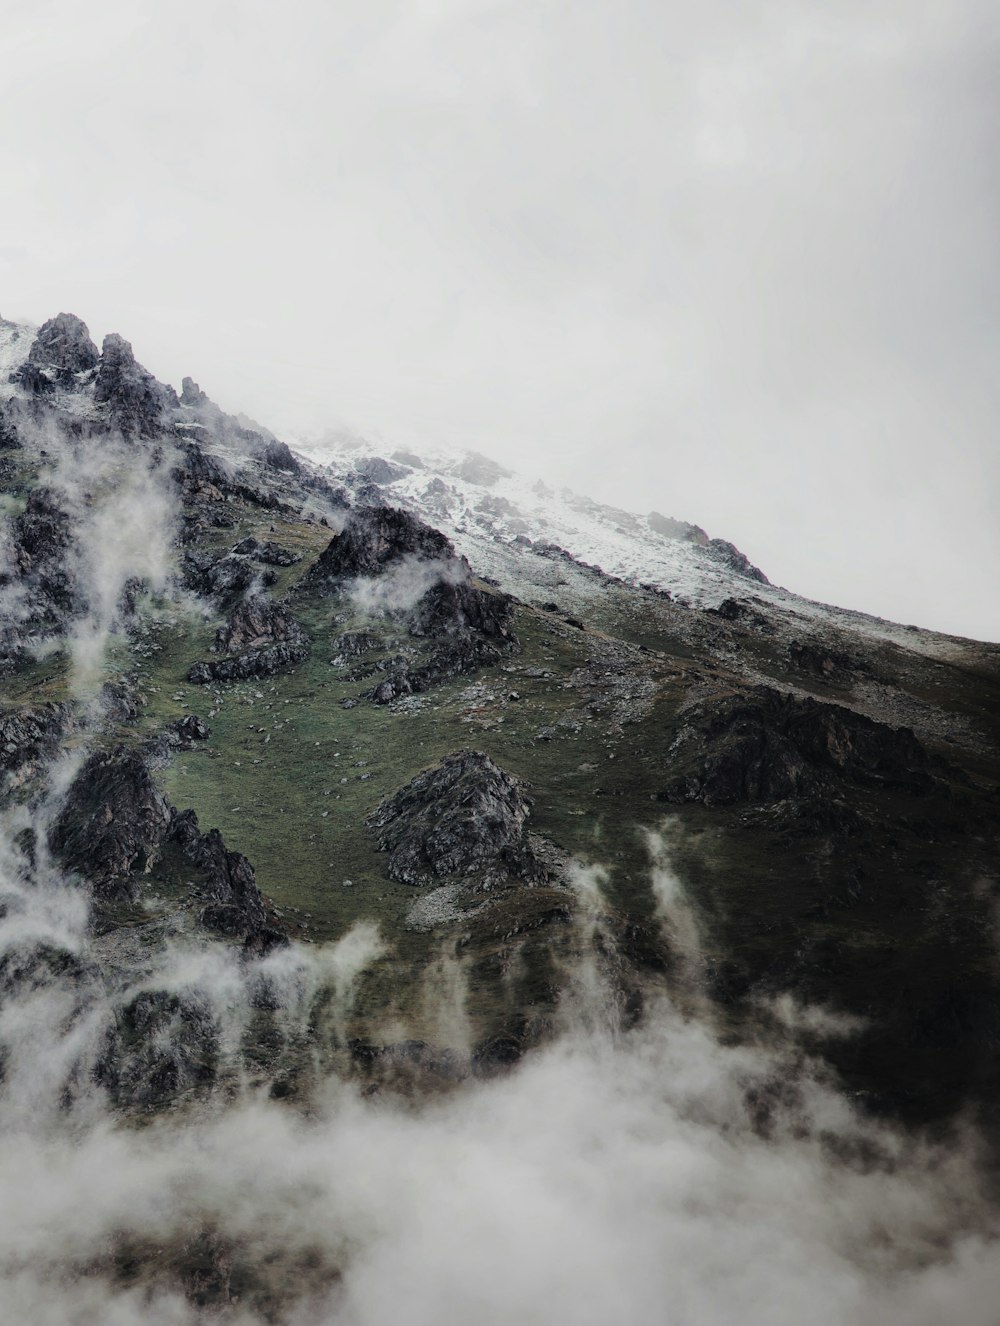 a mountain covered in clouds and snow on a cloudy day